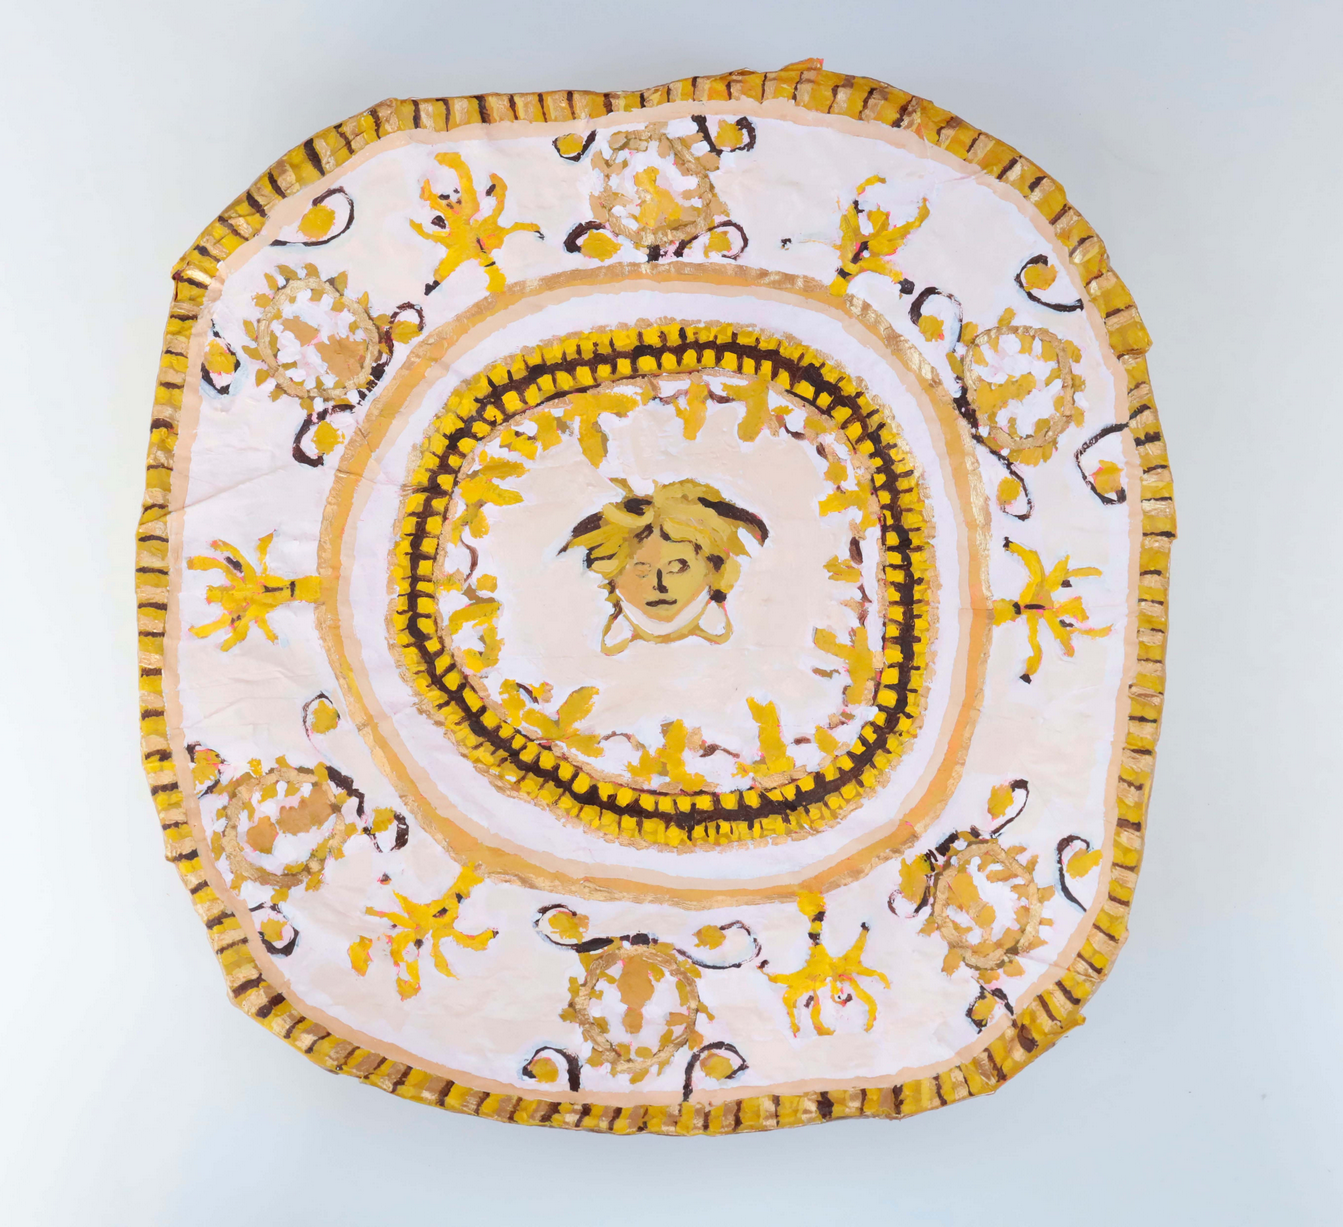 Taylor Lee Nicholson, "Versace I Love Baroque Bread and Butter Plate" SOLD